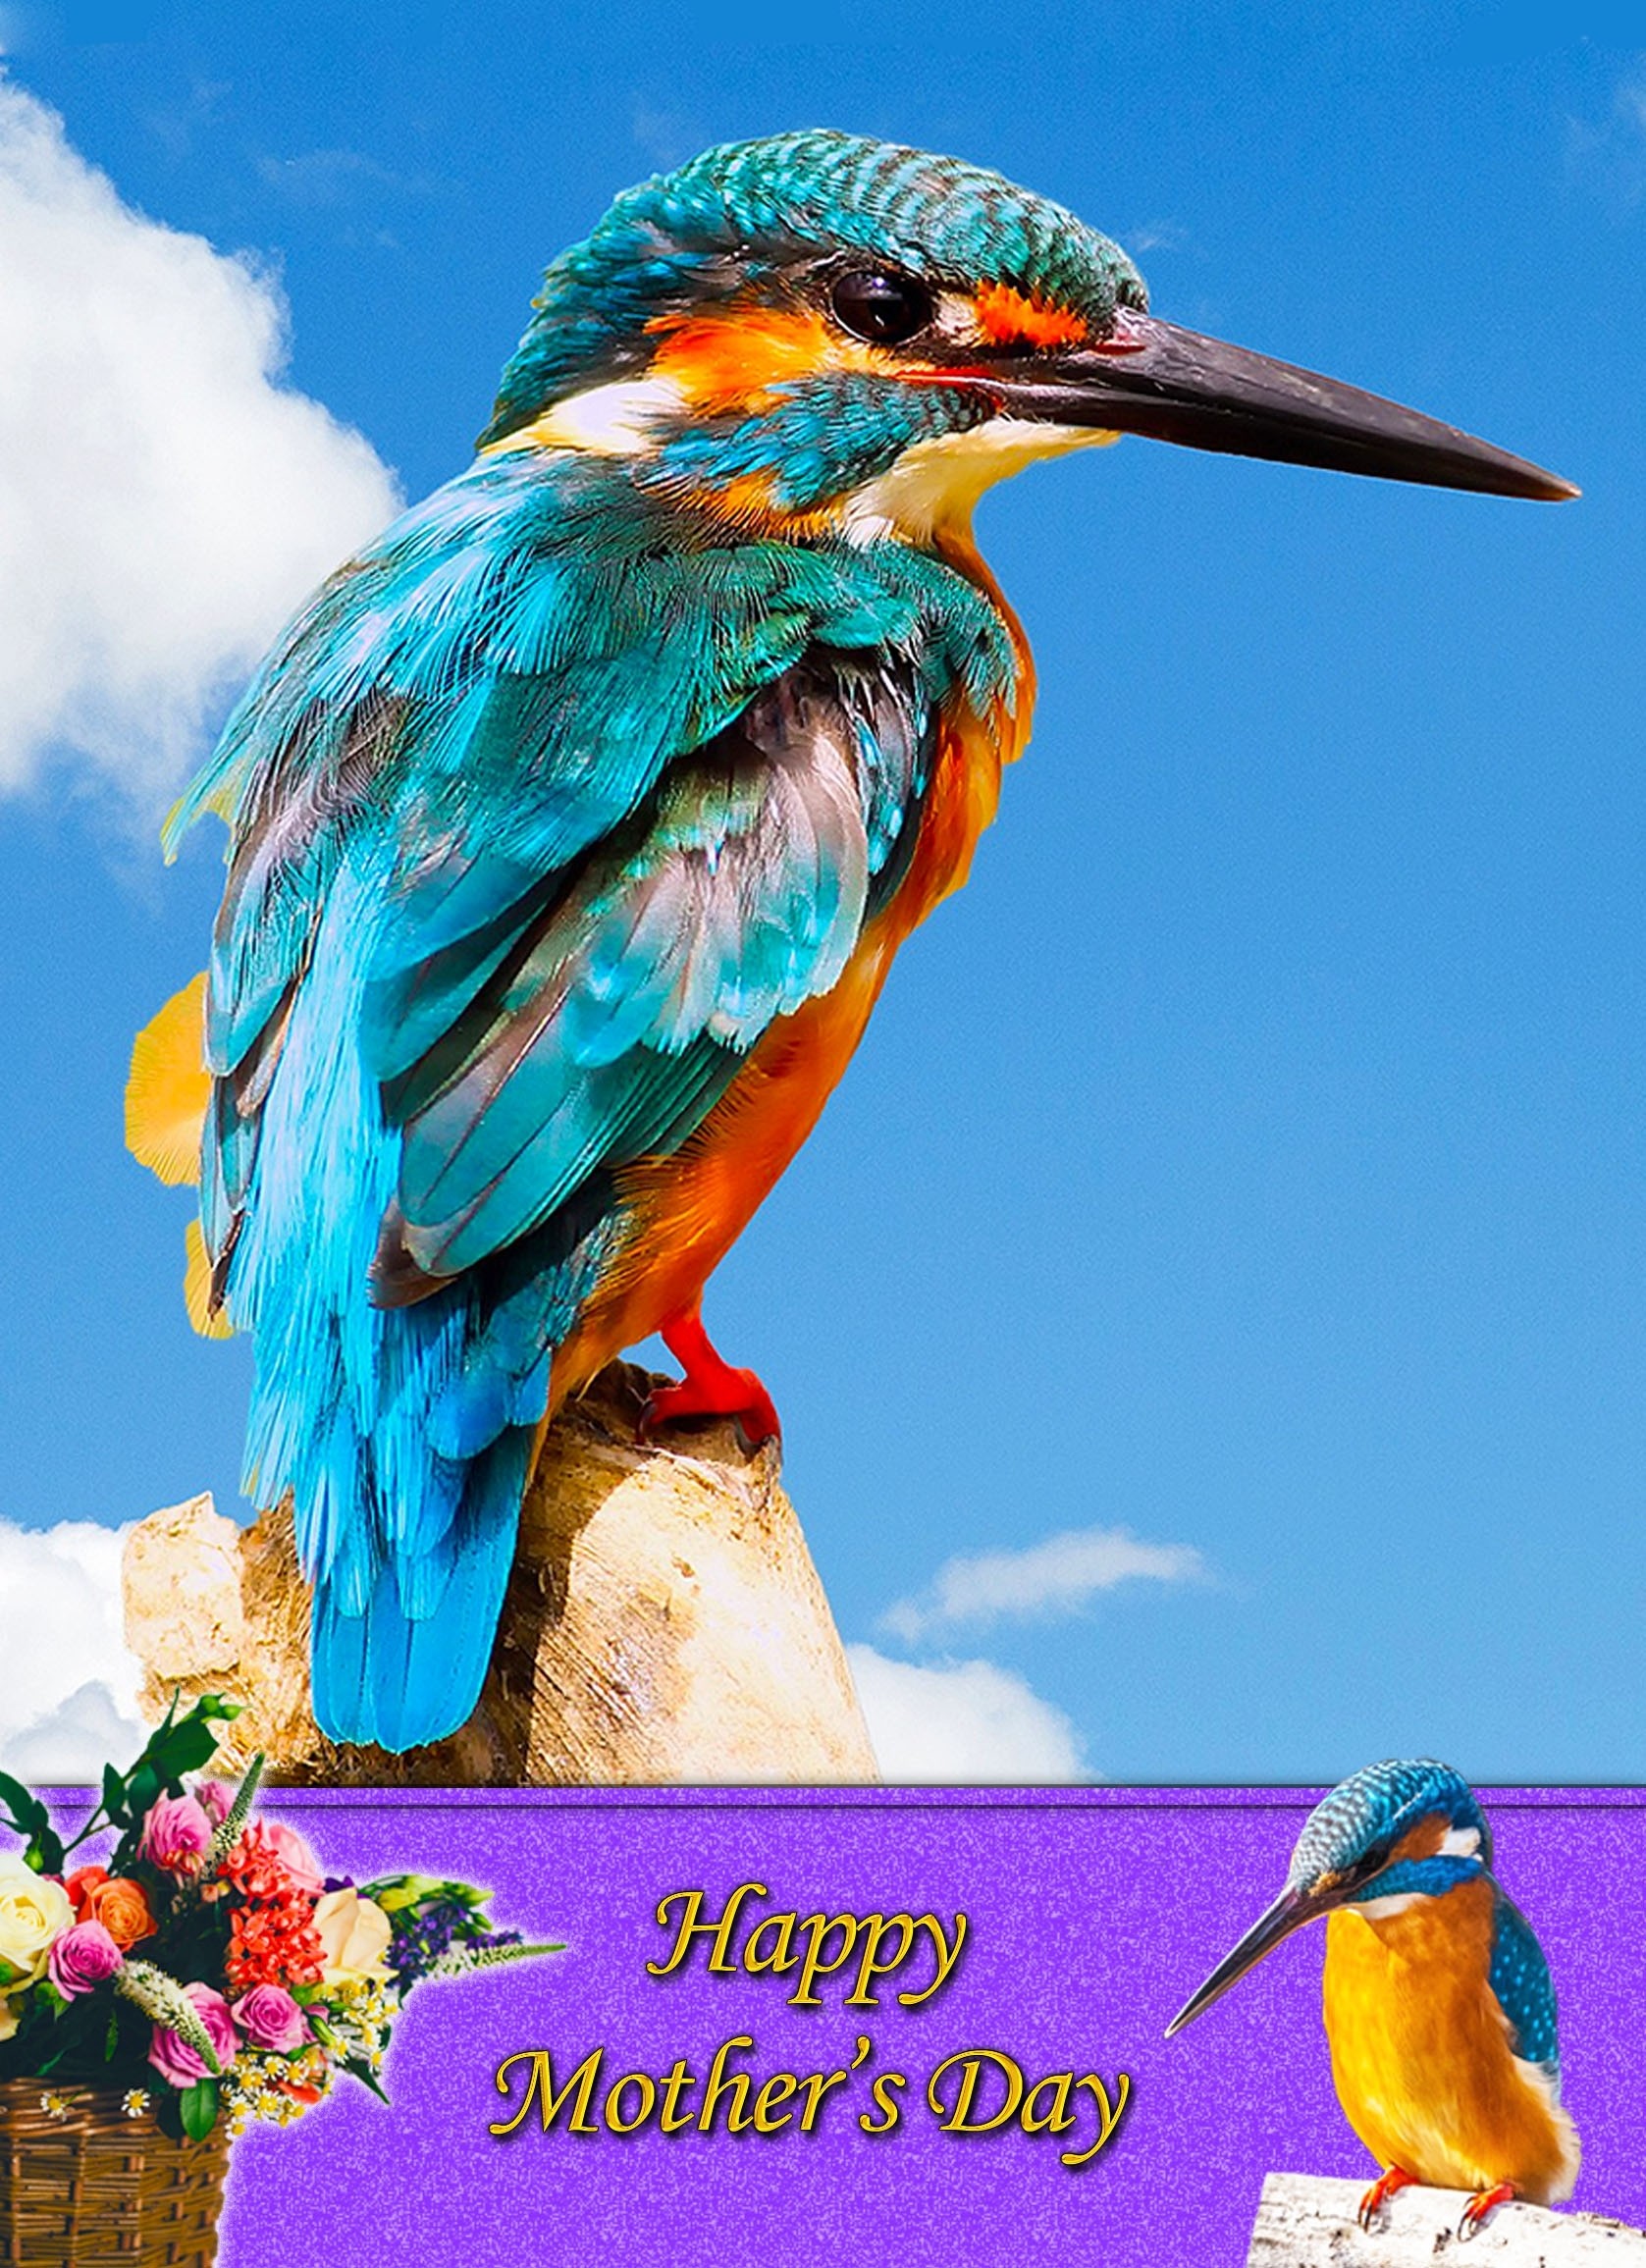 Kingfisher Mother's Day Card